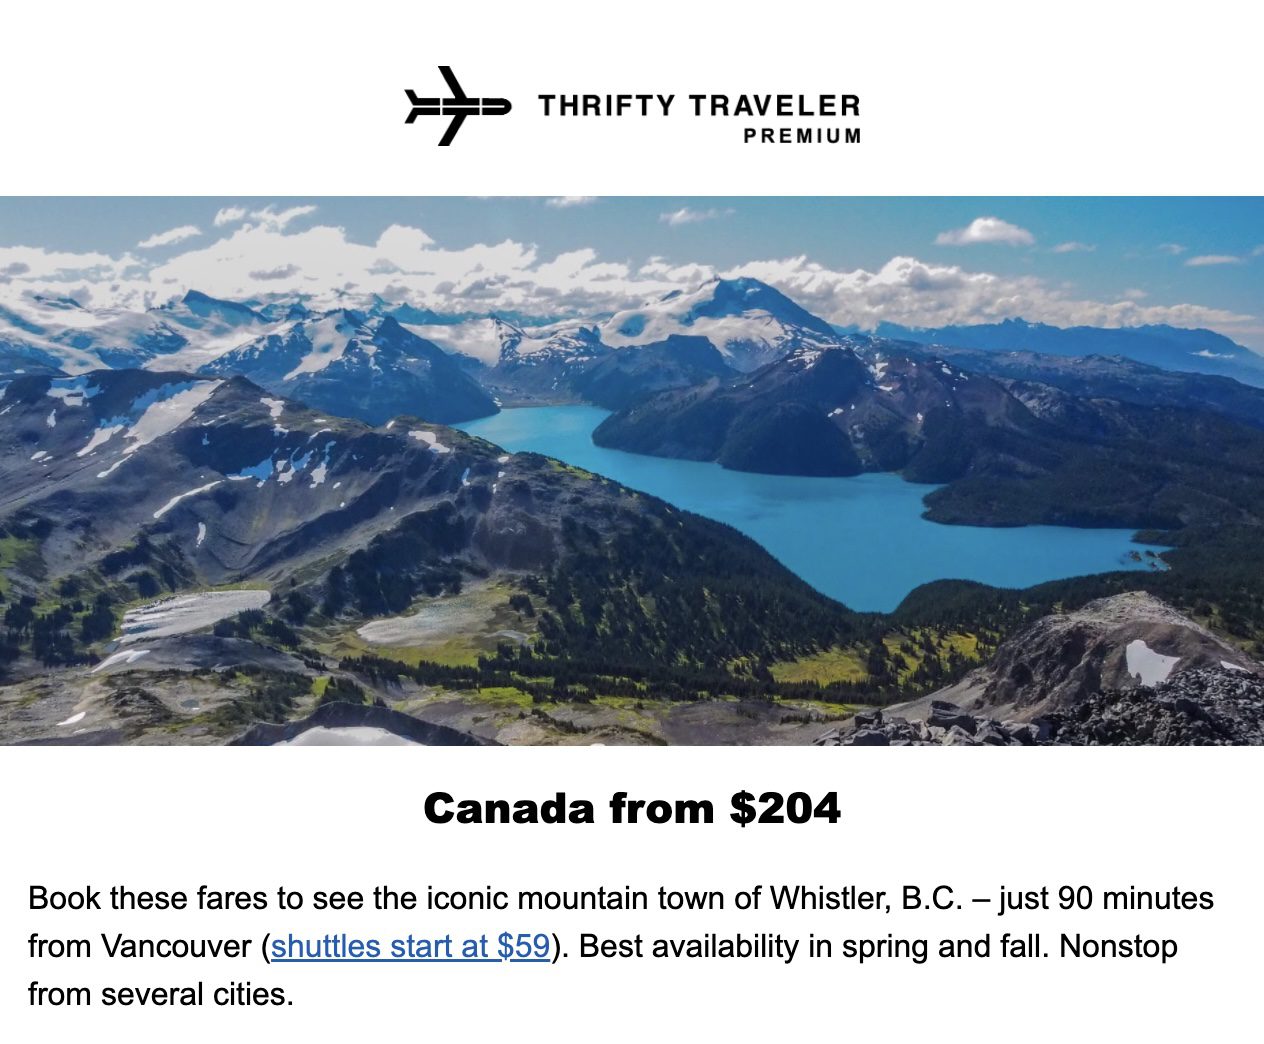 Cheap flights to Vancouver